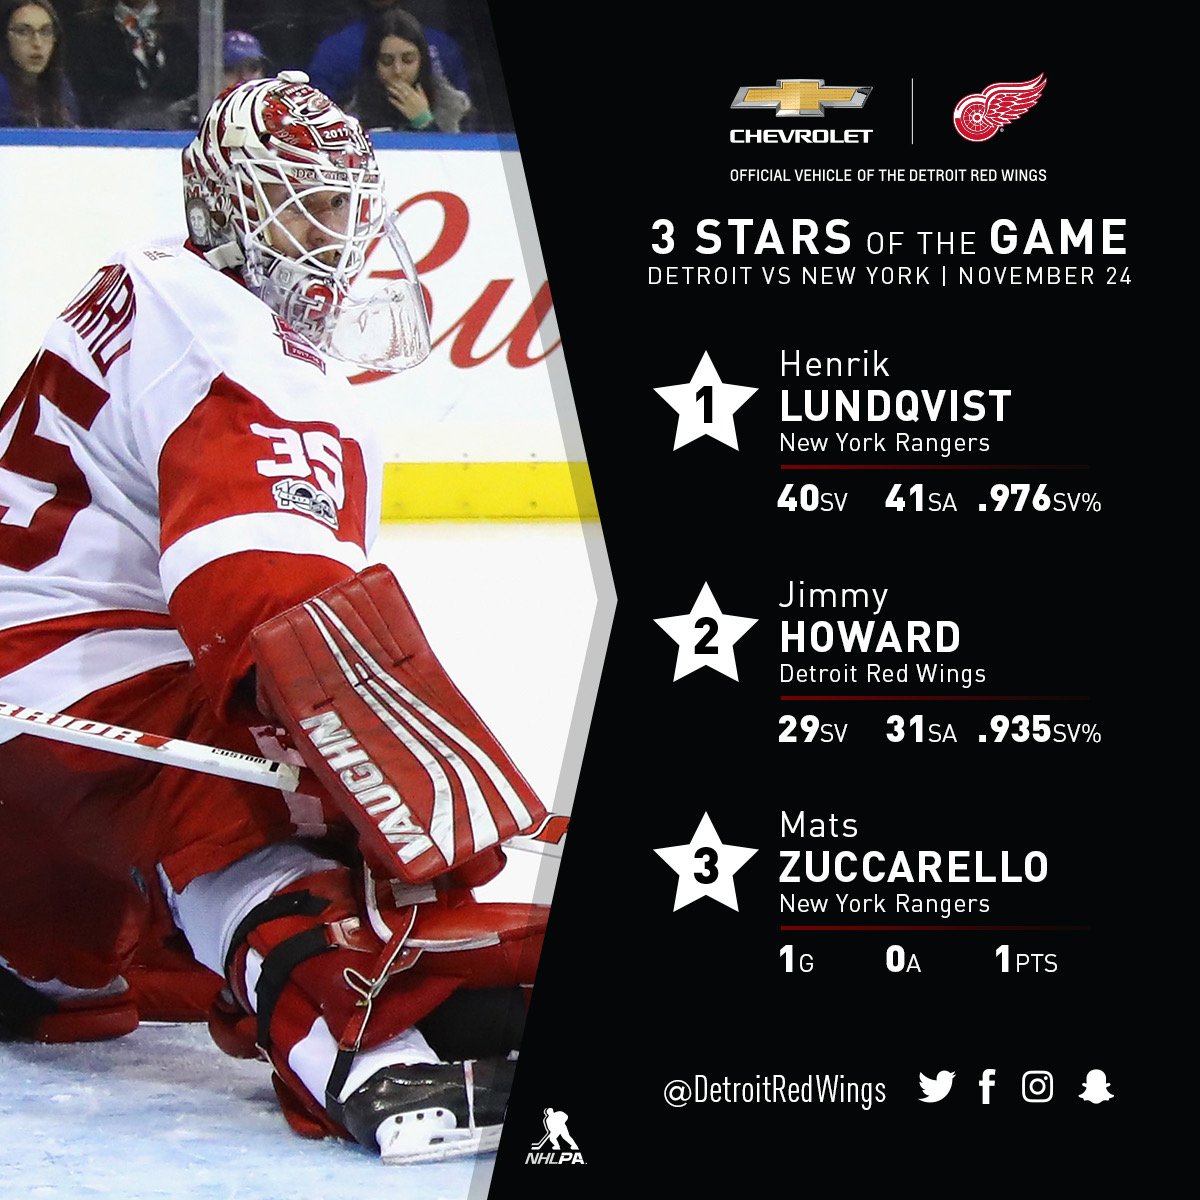 Jimmy with the 2nd ⭐️ tonight. #LGRW https://t.co/06KGNE6lUd